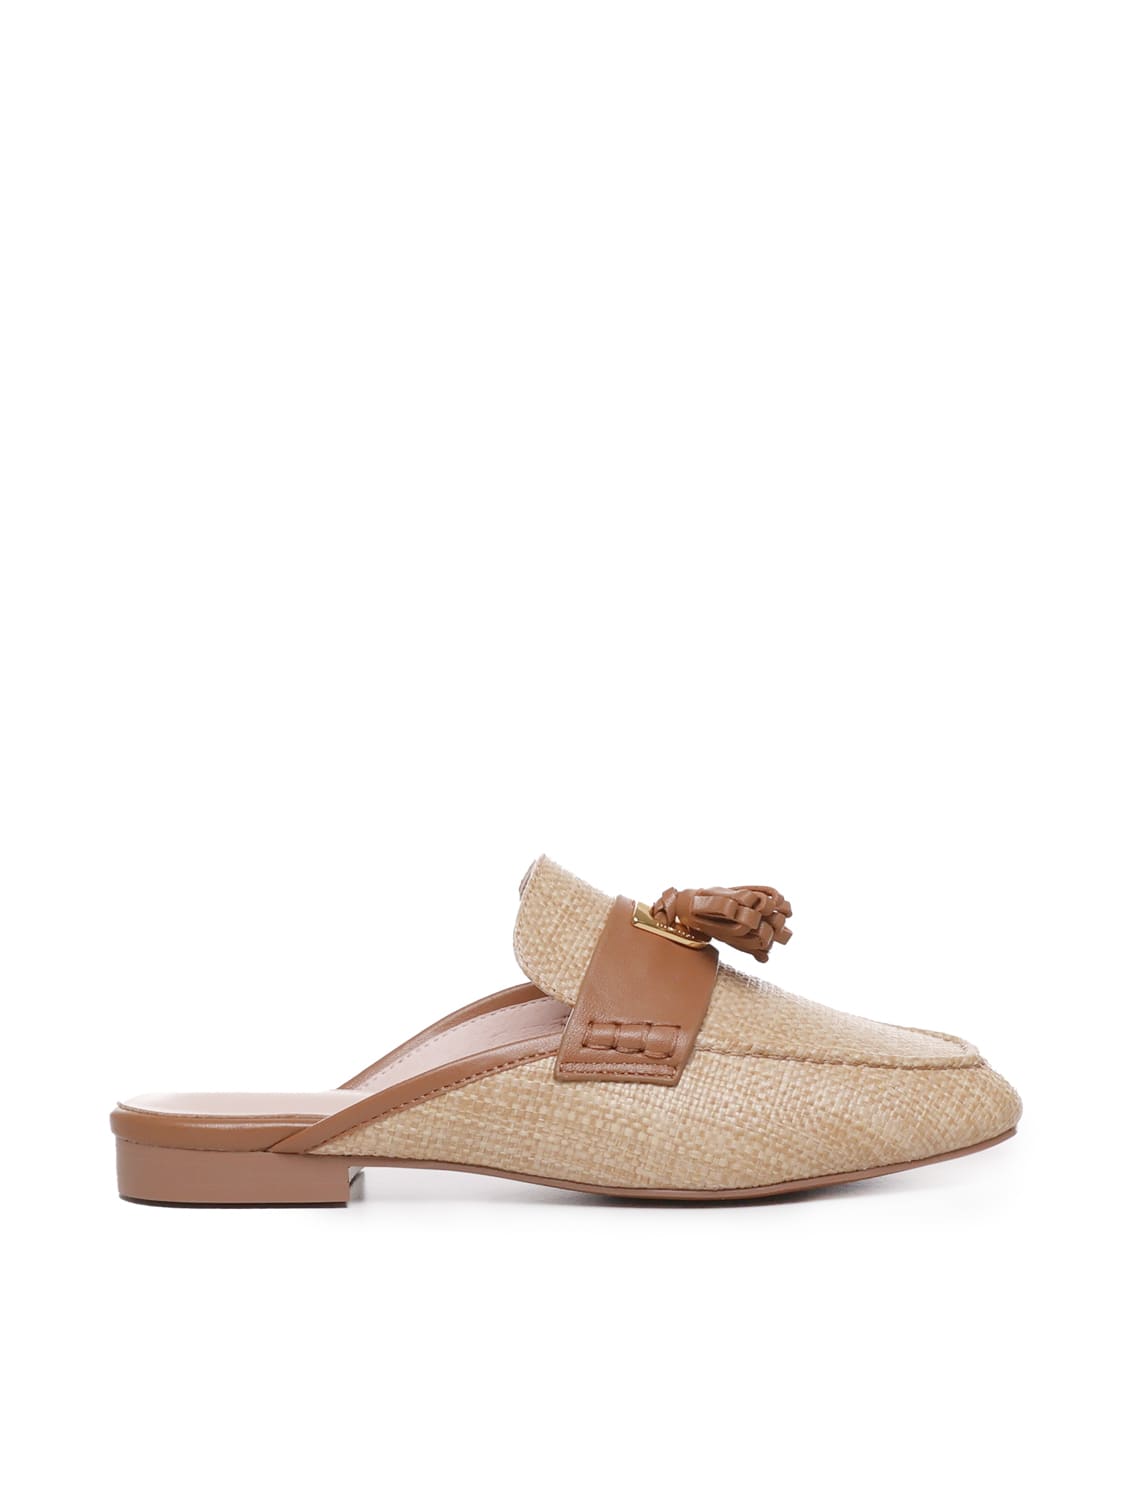 Beat Sabot Loafers